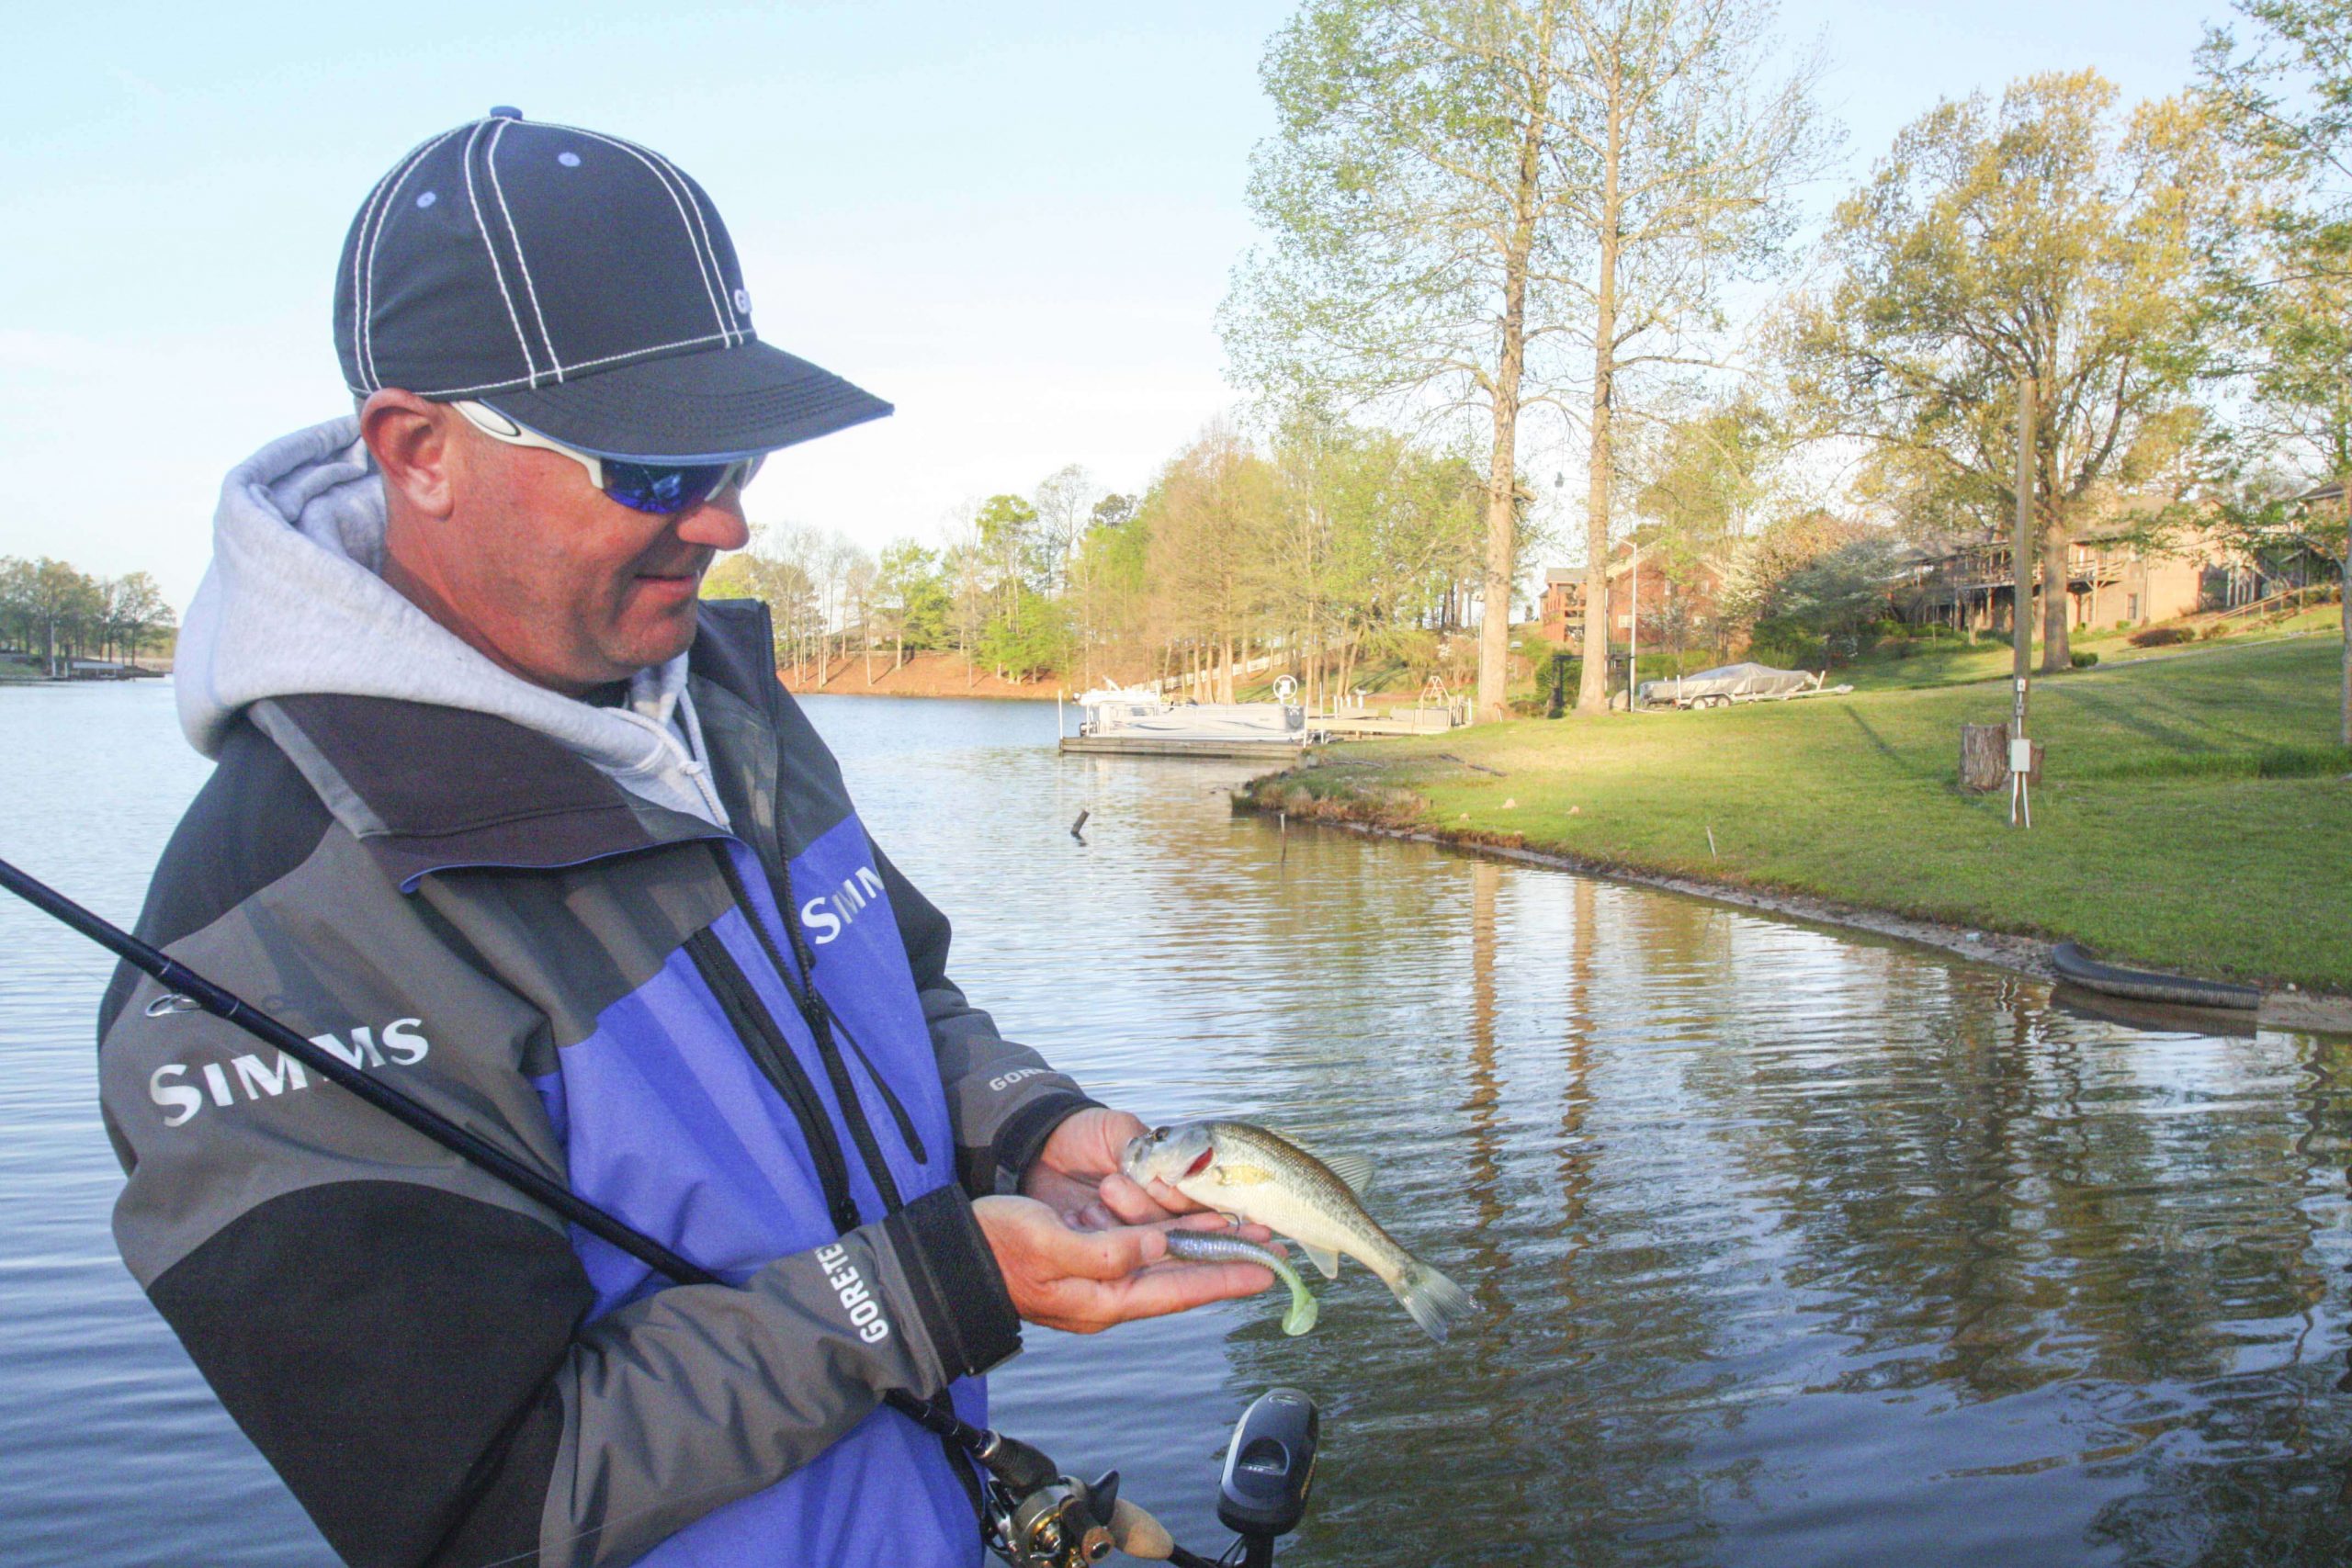 <b>7:18 a.m.</b> He switches to a shad colored 4-inch Keitech Swing Impact swimbait rigged on an 1/8-ounce head and catches a tiny largemouth off a moored pontoon boat. âAmazing! I didnât know bass got this small!â<br>
<b>7:23 a.m.</b> Grigsby retrieves a white 1/2-ounce Venom spinnerbait past a sunken tree. 